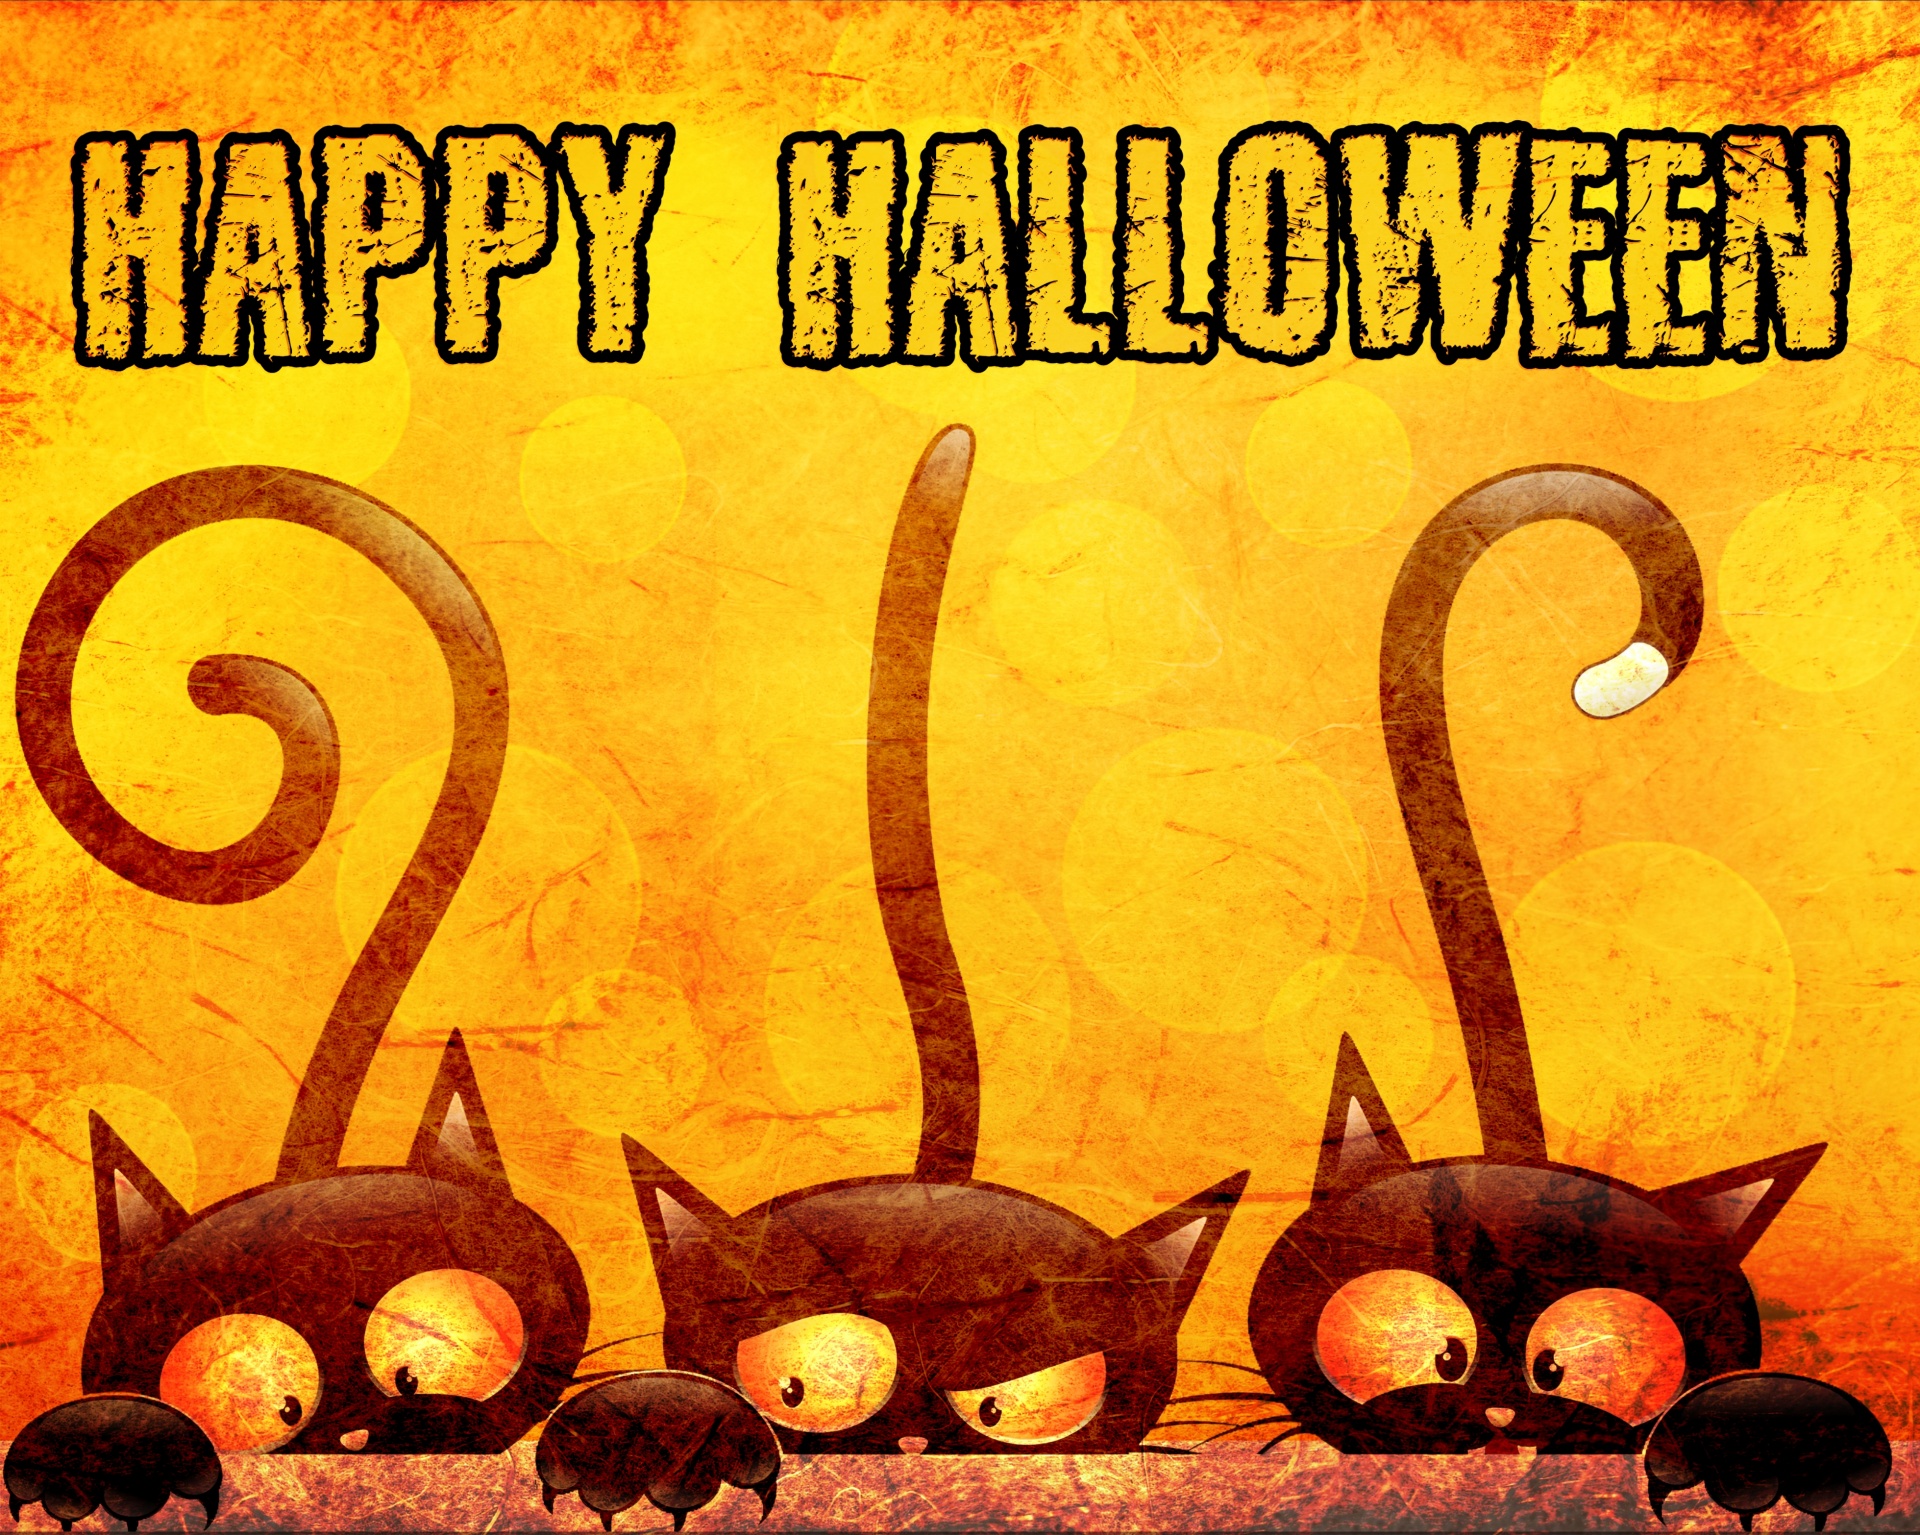 Happy Halloween scene with three black cats collage on orange stained old parchment paper background with mirror frame